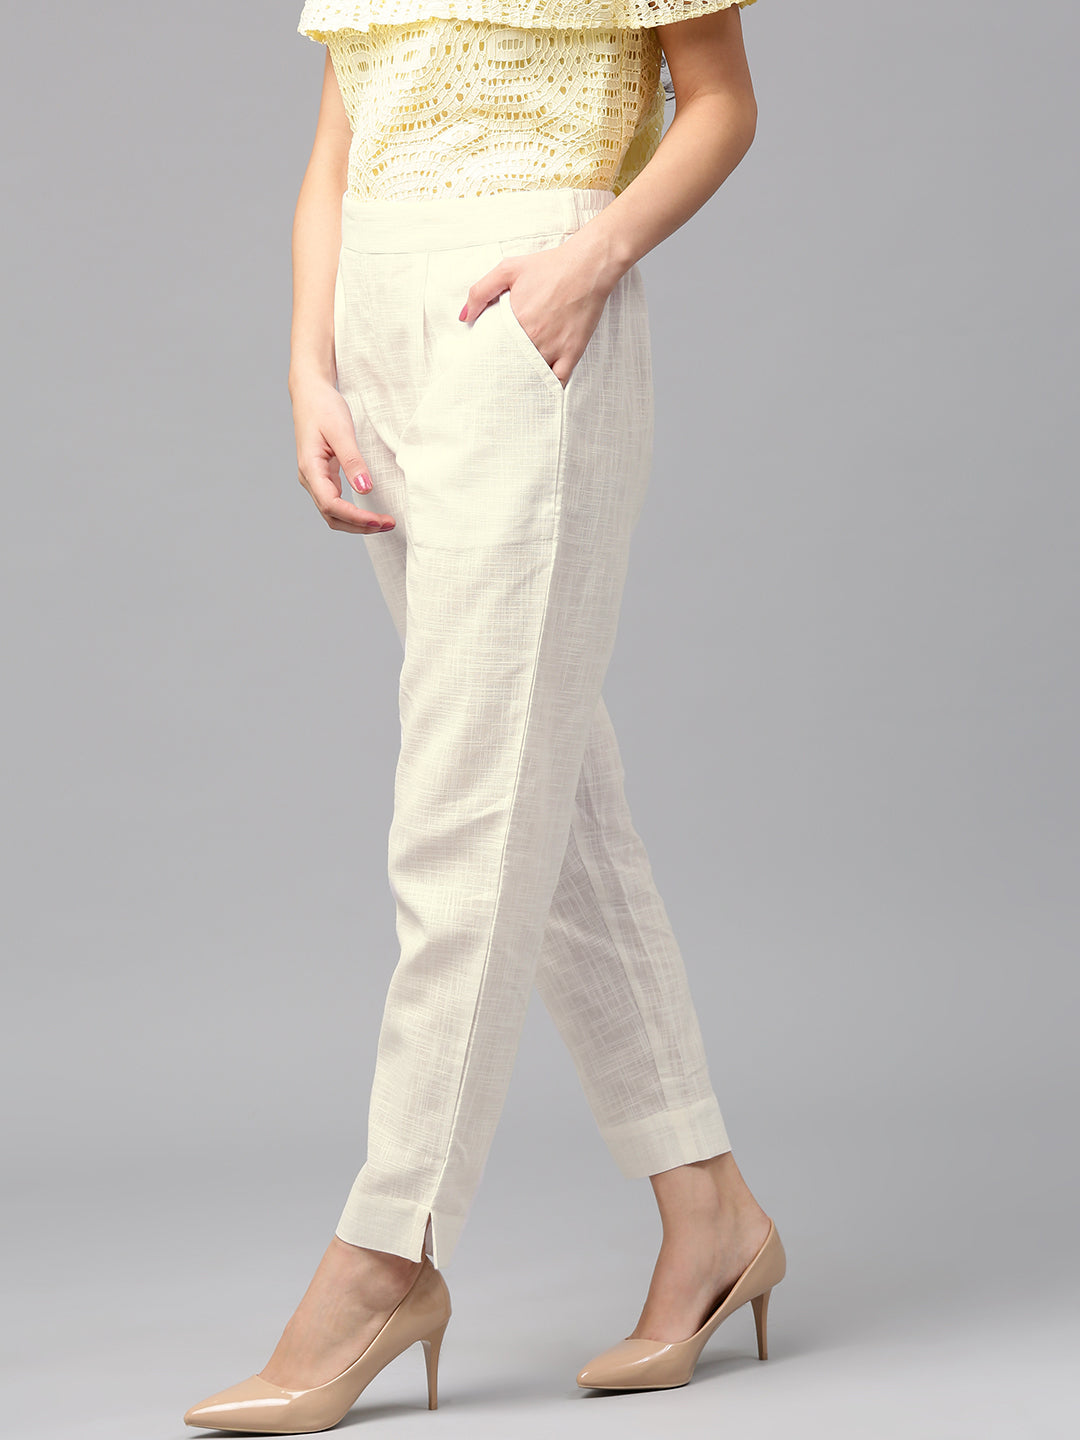 Buy White Trousers Online In India At Best Price Offers  Tata CLiQ